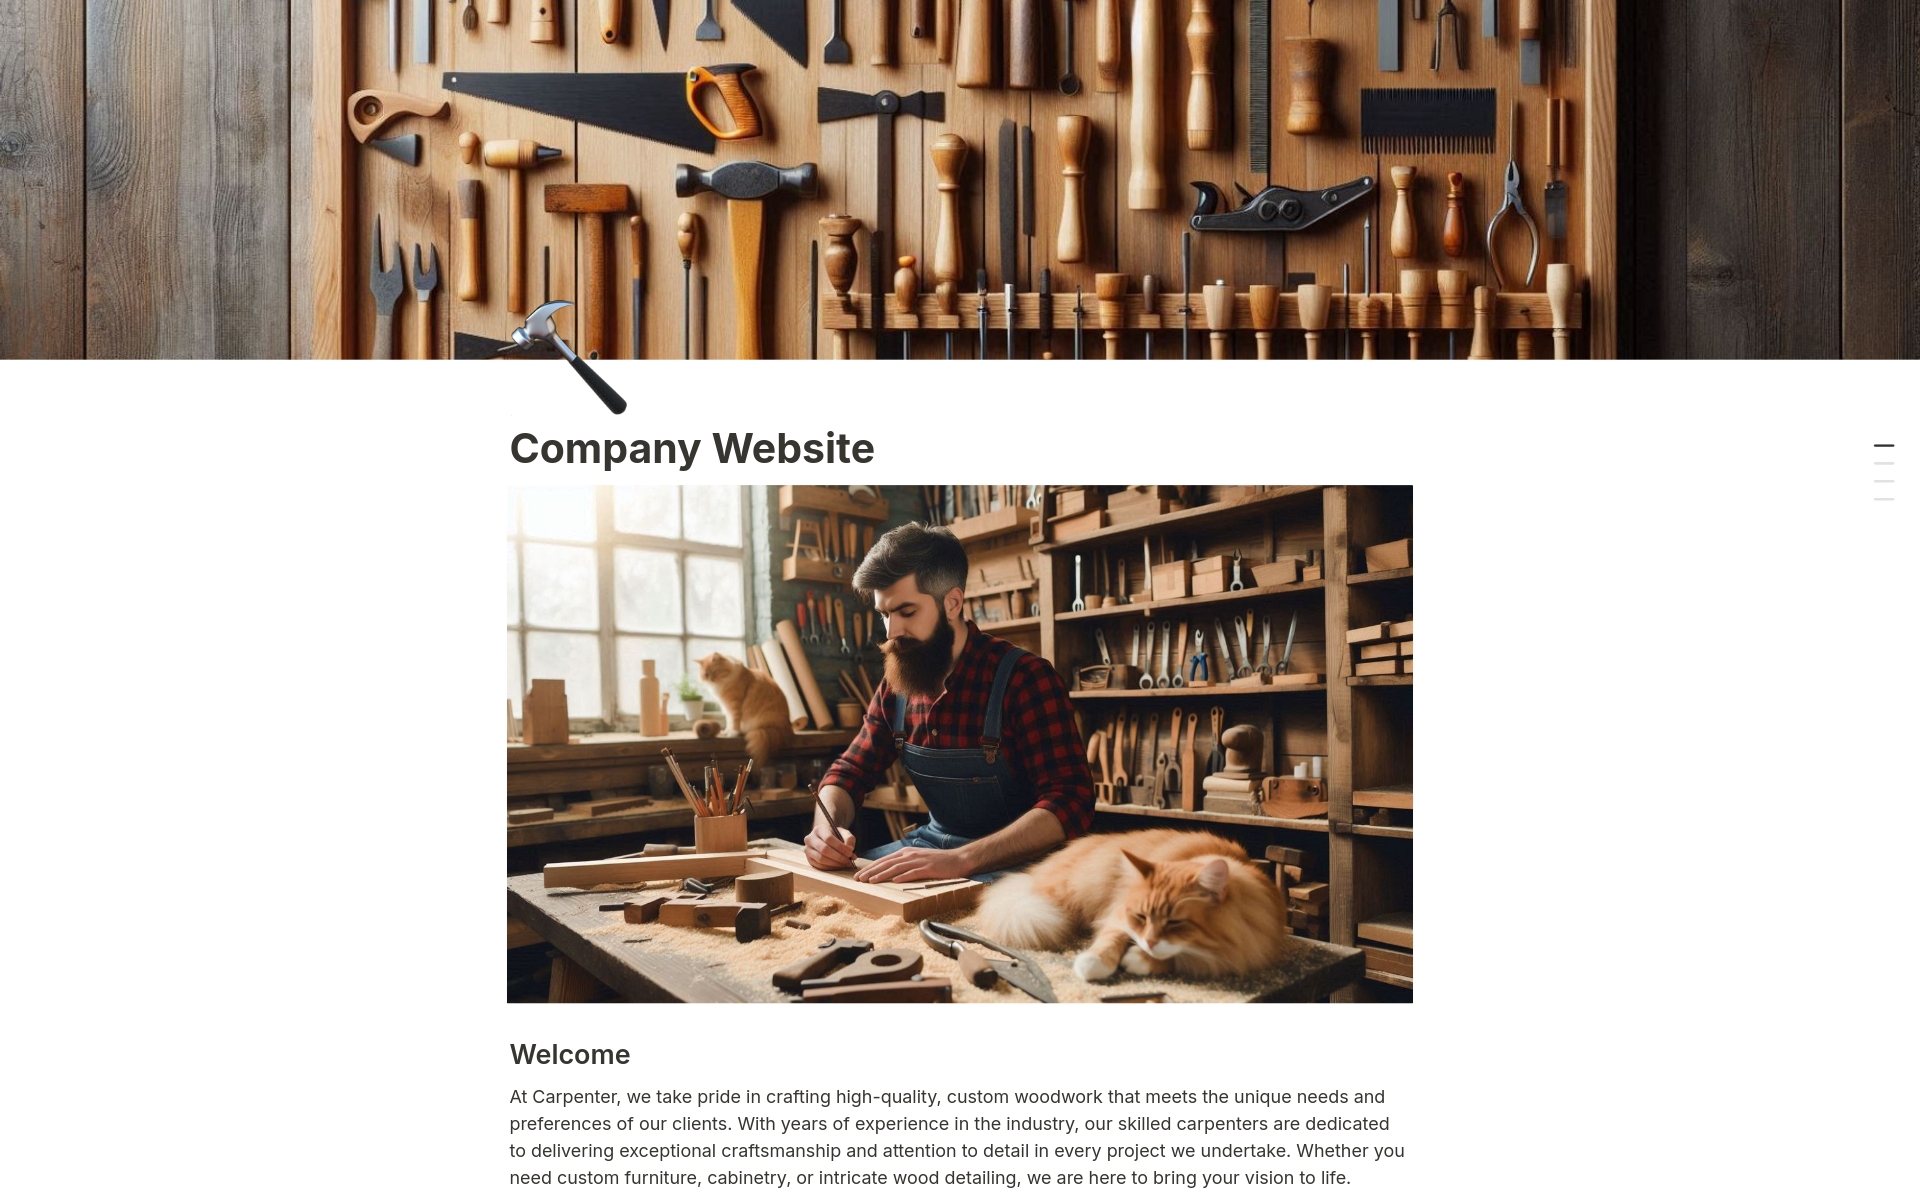 A boilerplate that allows you to create a company website and publish to Notion Site easily, let's use it to connect to all the potential customer worldwide